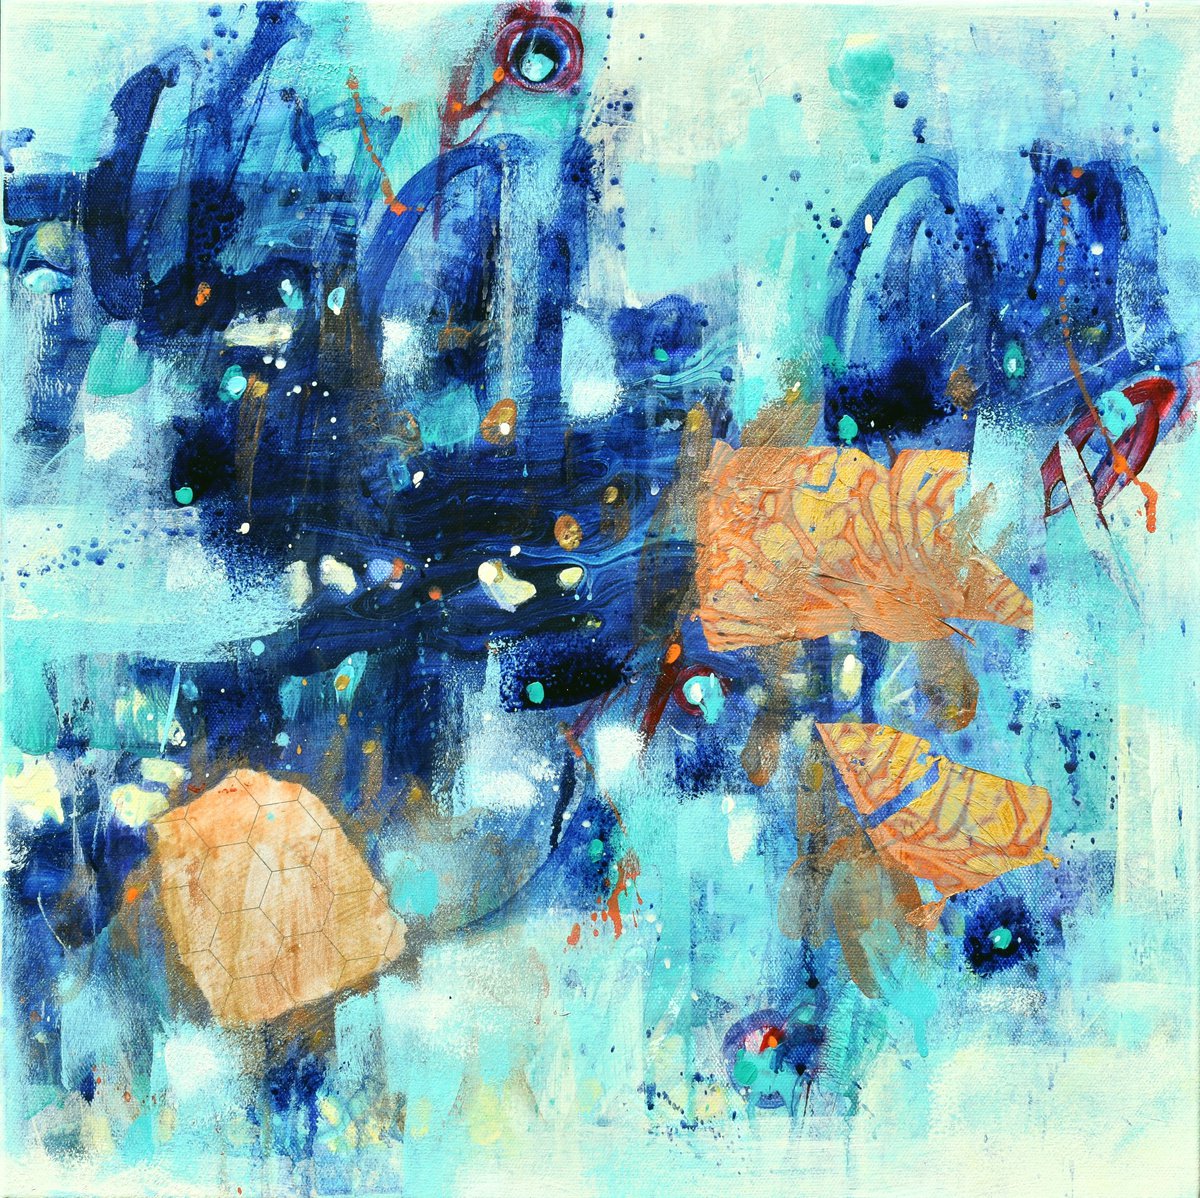 Acceptance - Abstract art - 16 x 16 IN / 41 x 41 CM - Abstract Painting, Ready to Hang by Cynthia Ligeros Abstract Artist